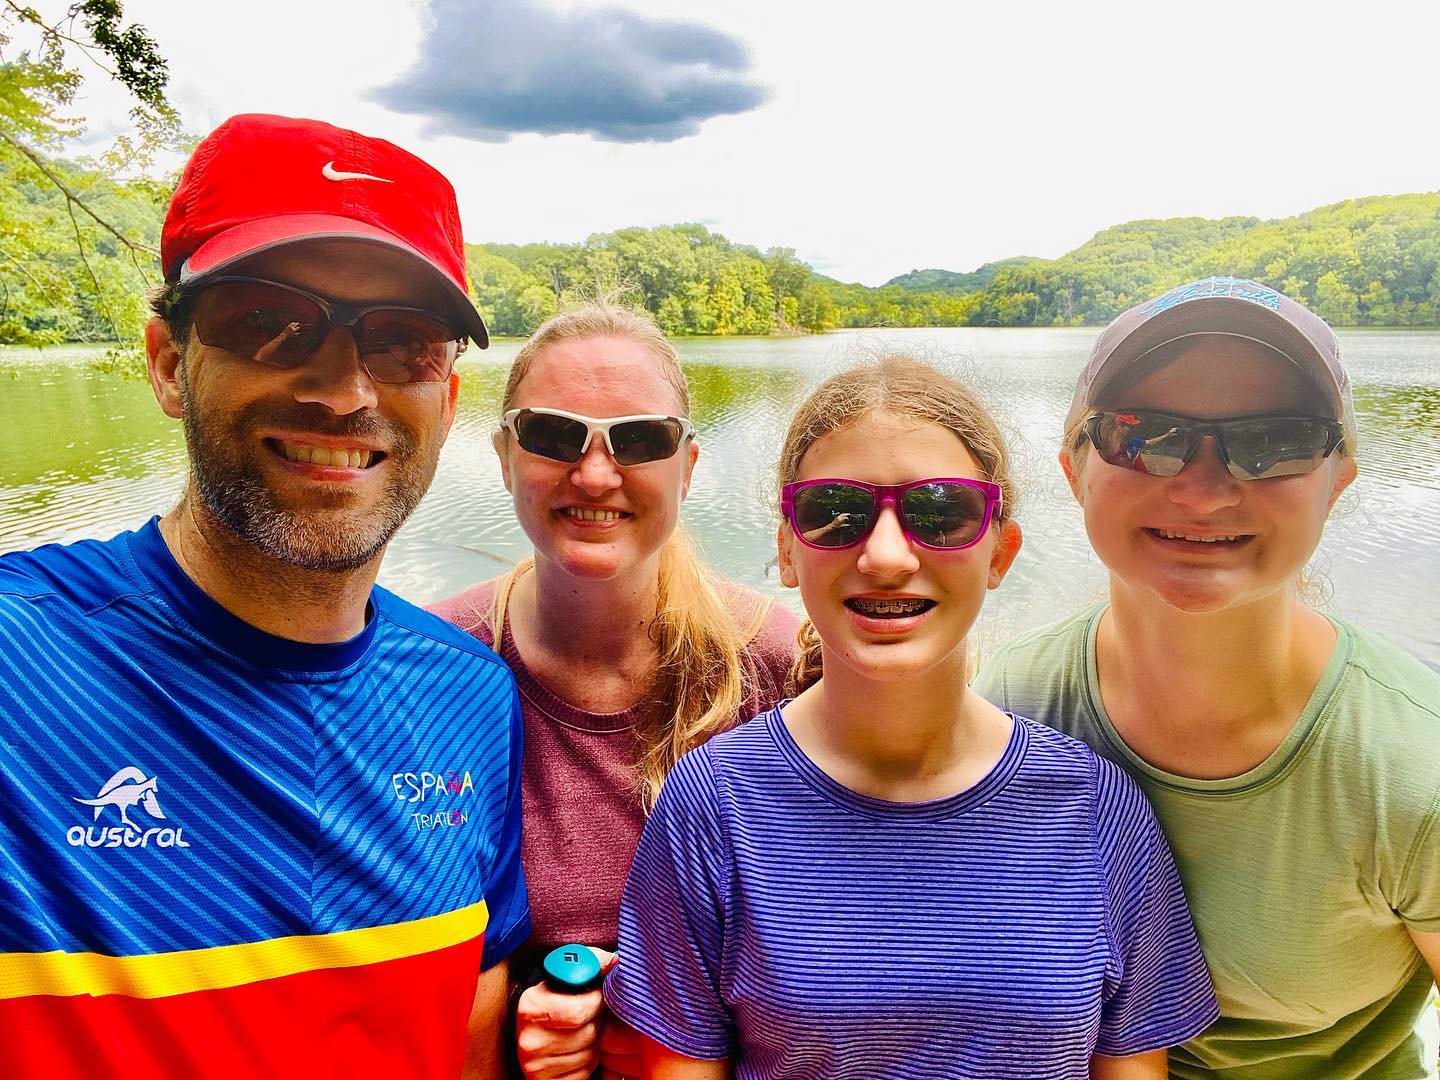 Just finished a 4-mile hike at Radnor Lake with Team Agee. This followed an 11.3-mile run in the AM with Brian and a 2-mile run with Sara. Awesome and active day. #family #running #hiking